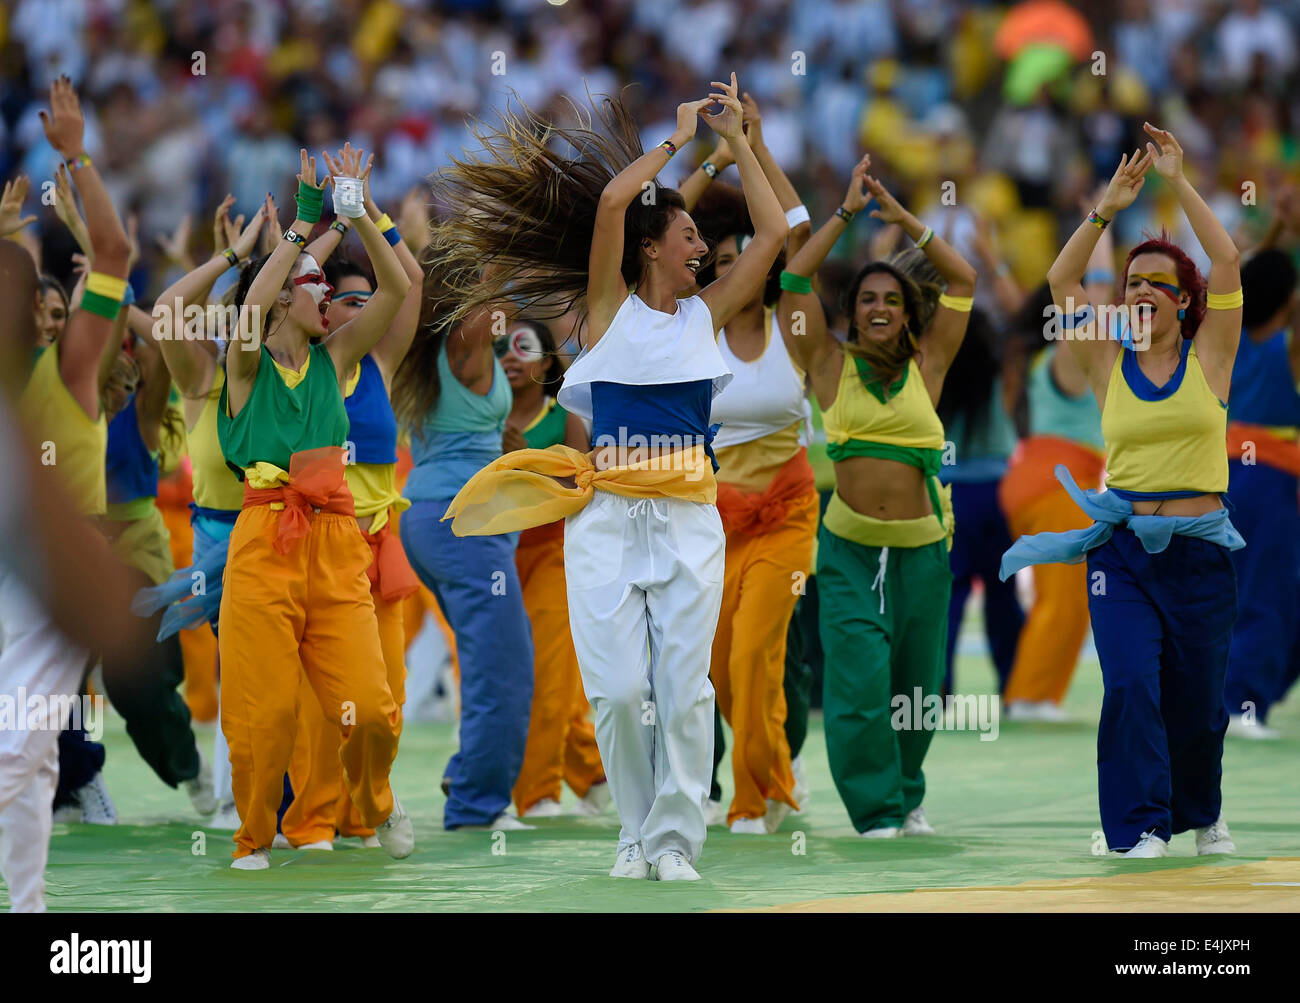 Rio De Janeiro, Brazil. 13th July, 2014. Dancers perform during the closing ceremony before the final match between Germany and Argentina of 2014 FIFA World Cup at the Estadio do Maracana Stadium in Rio de Janeiro, Brazil, on July 13, 2014. Credit:  Qi Heng/Xinhua/Alamy Live News Stock Photo